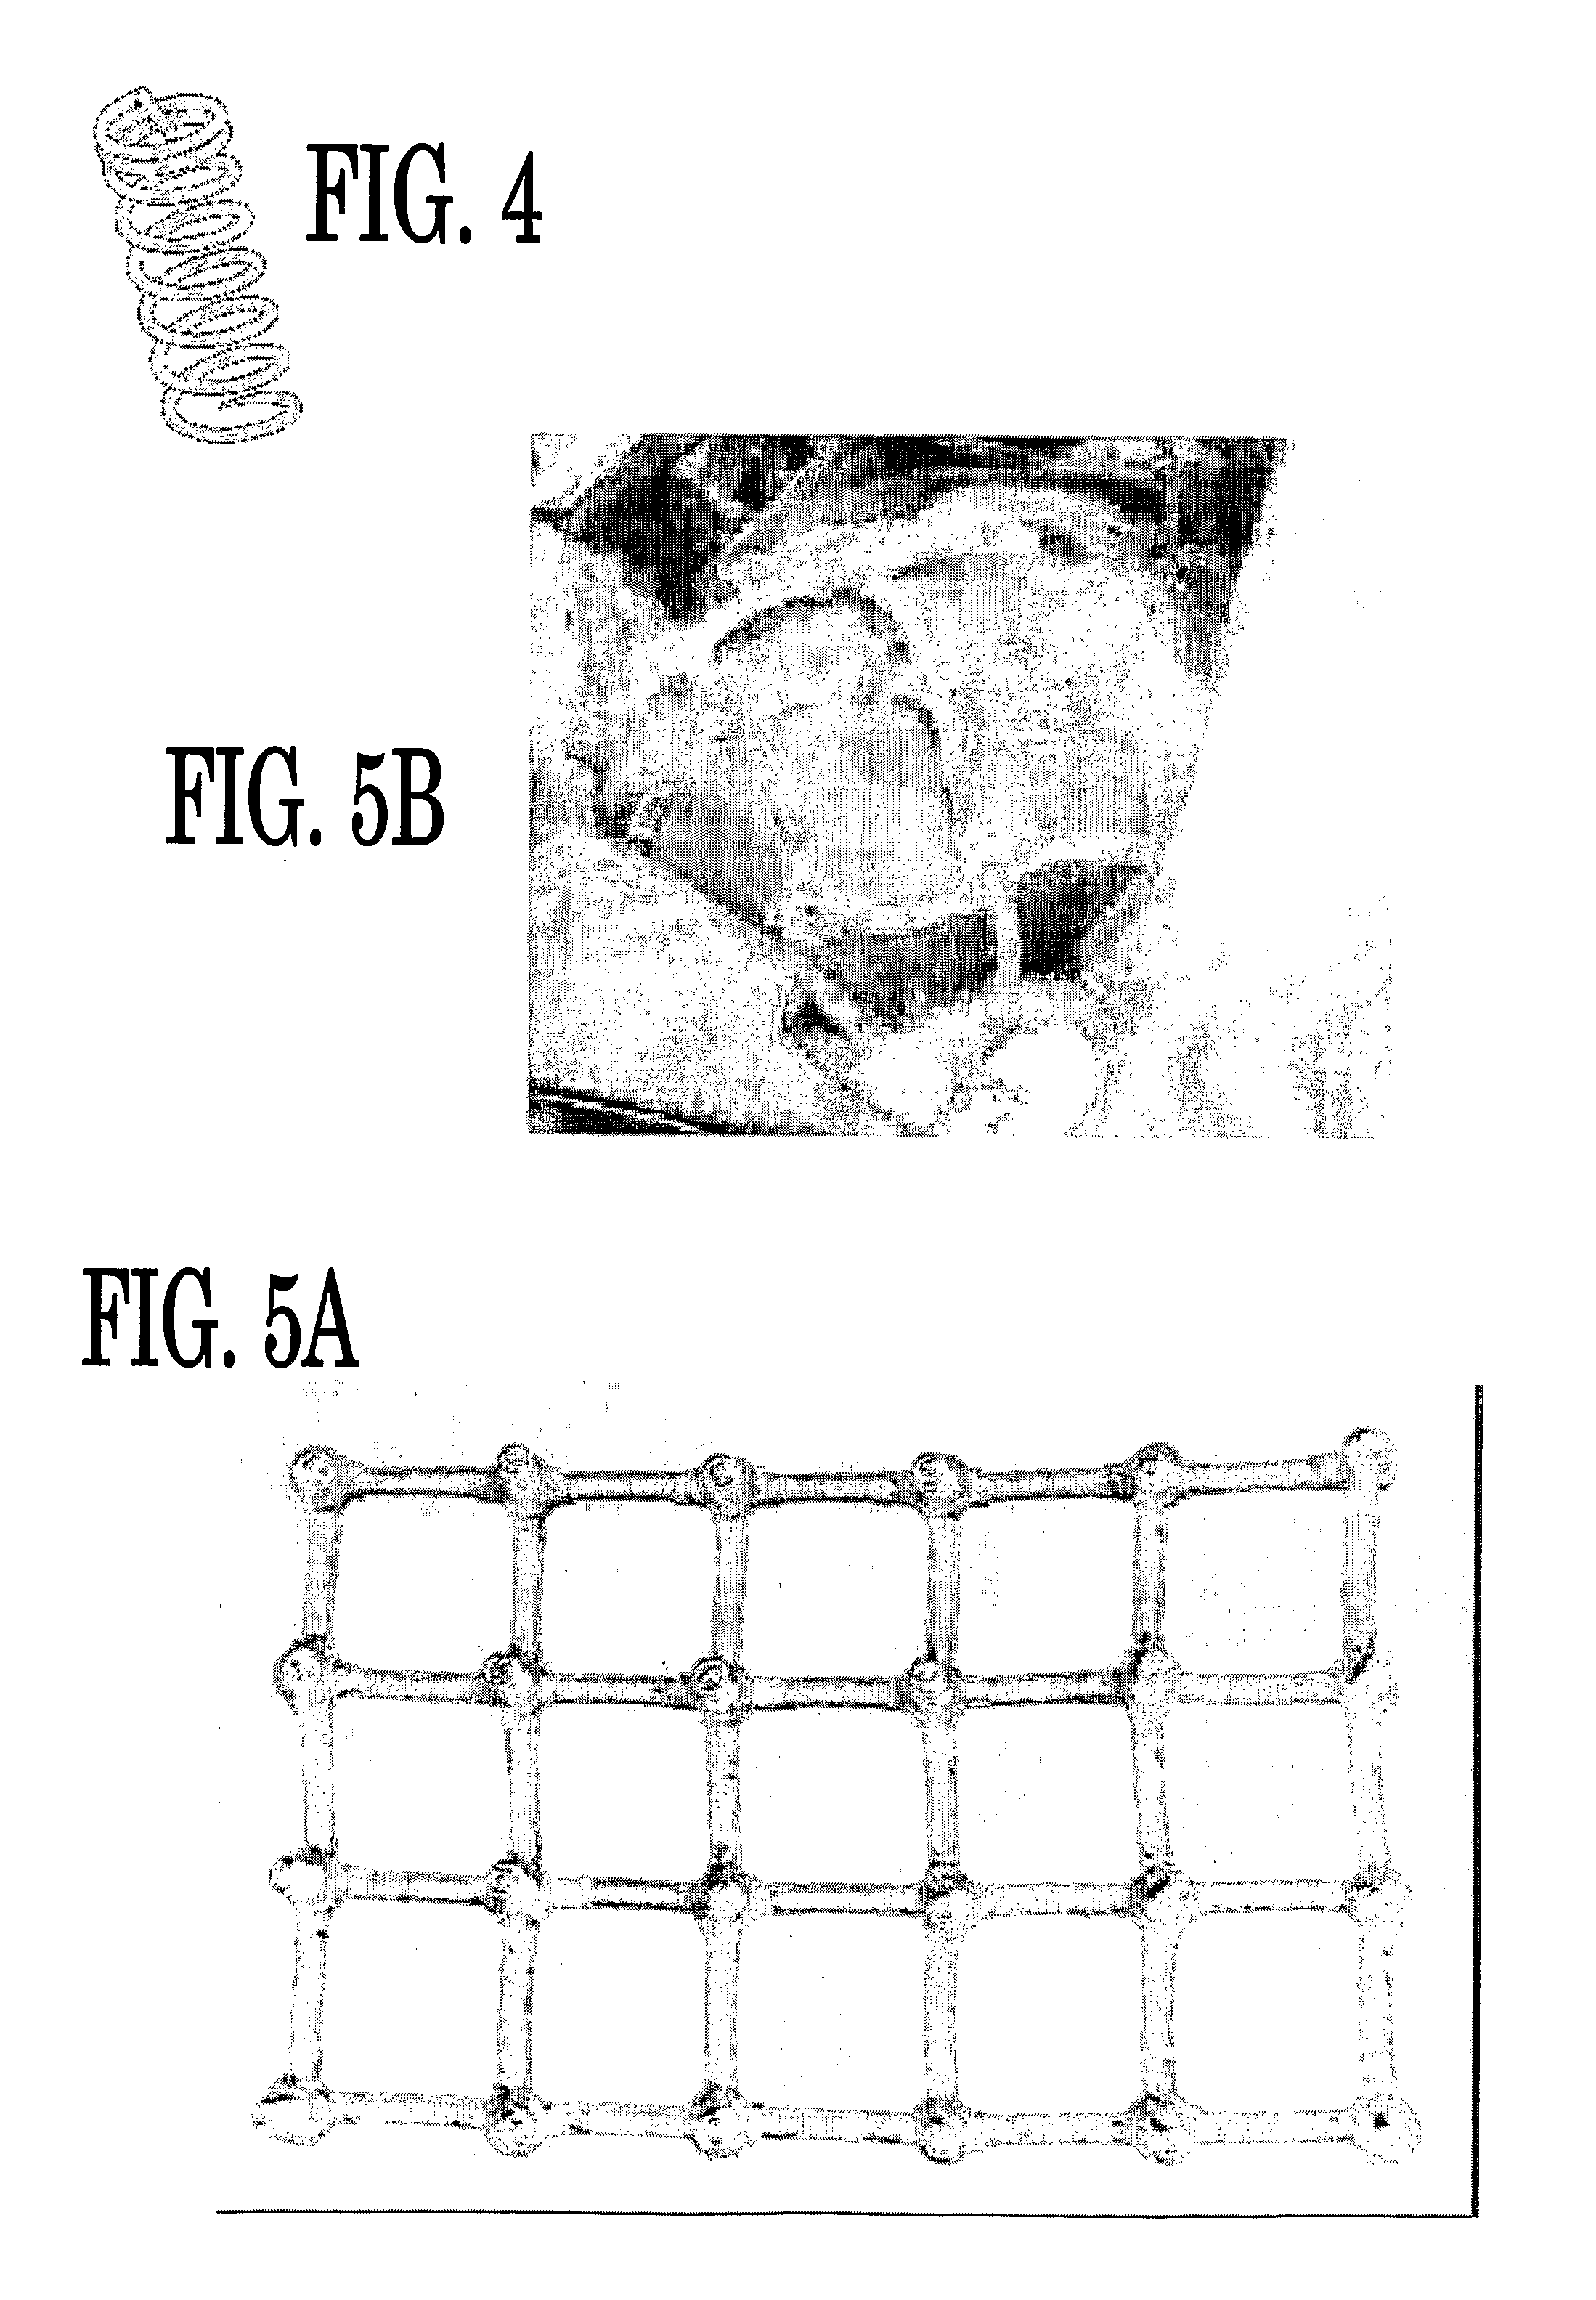 In Vivo Device for Assisting and Improving Diastolic Ventricular Function